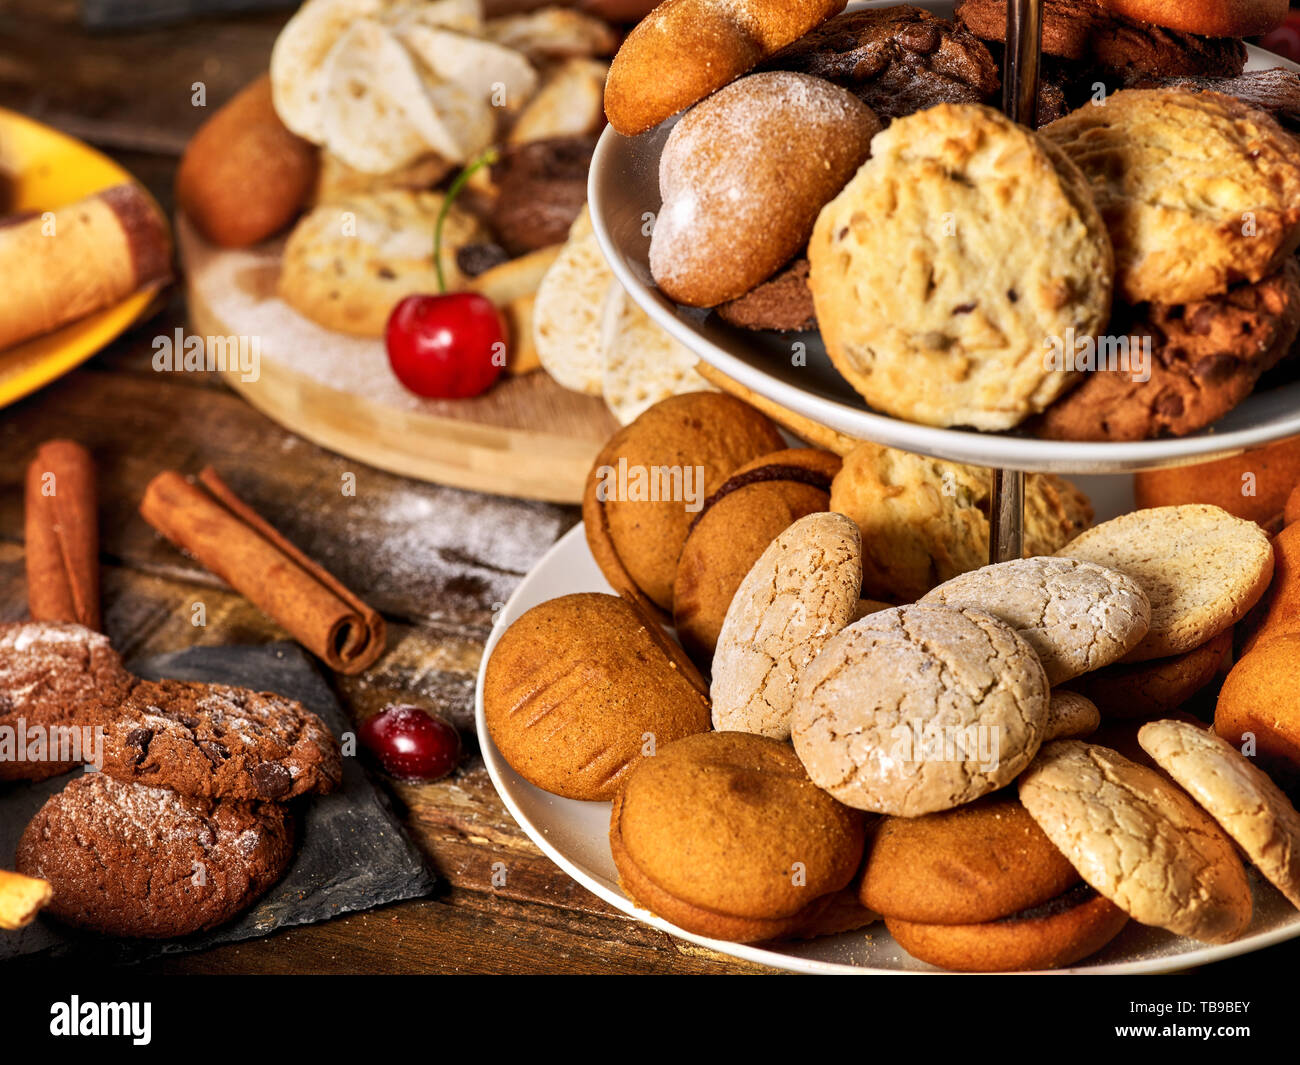 Oatmeal cookies, crispy wafer rolls on tier cake stand Stock Photo